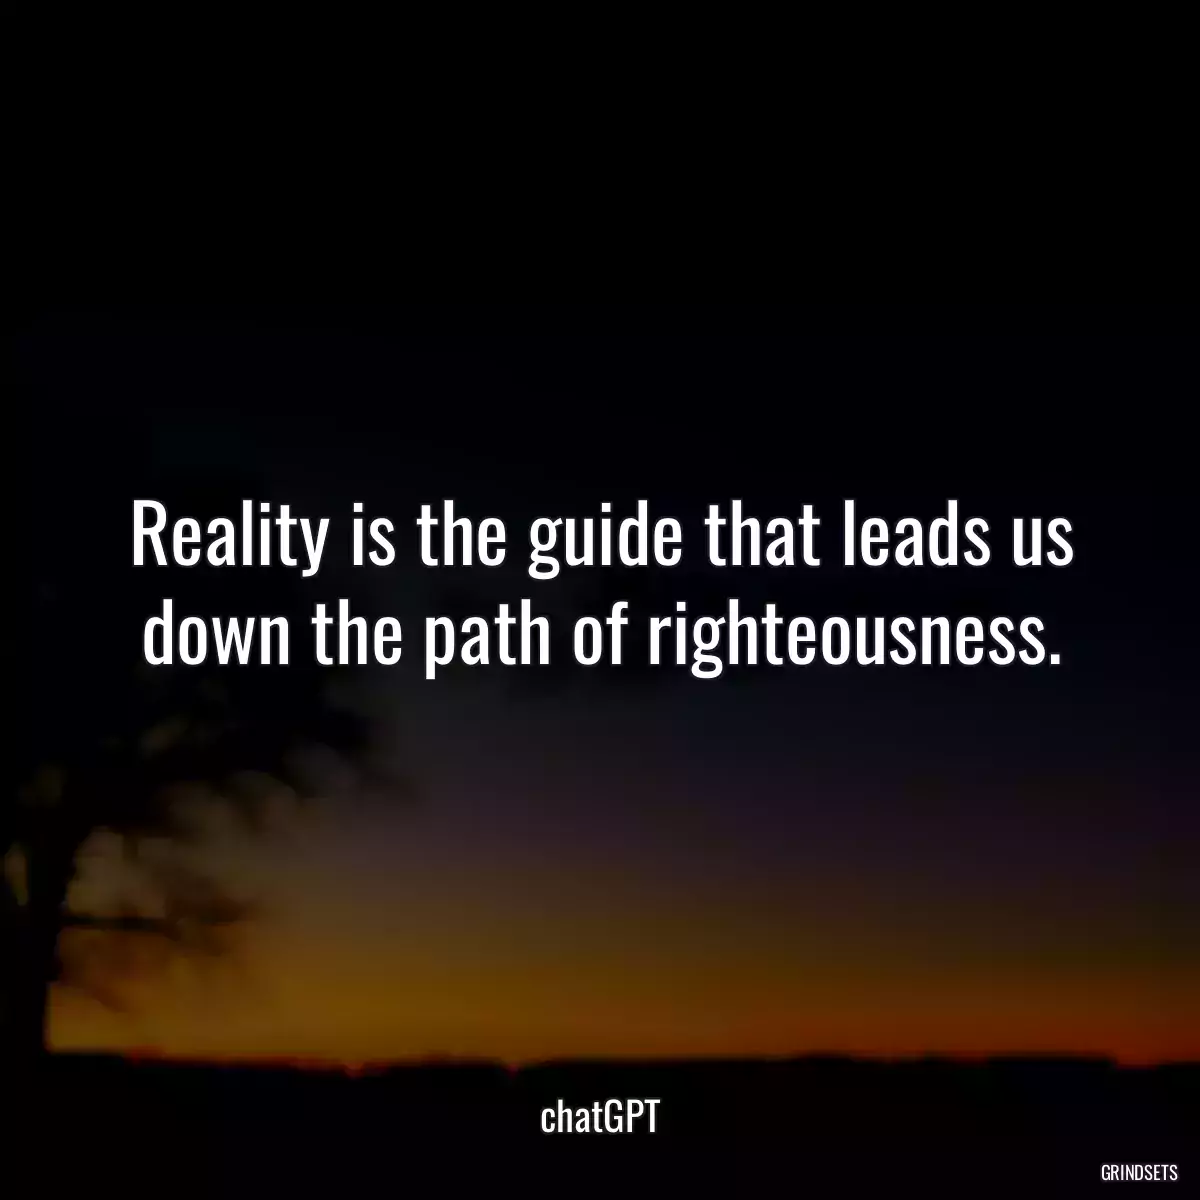 Reality is the guide that leads us down the path of righteousness.